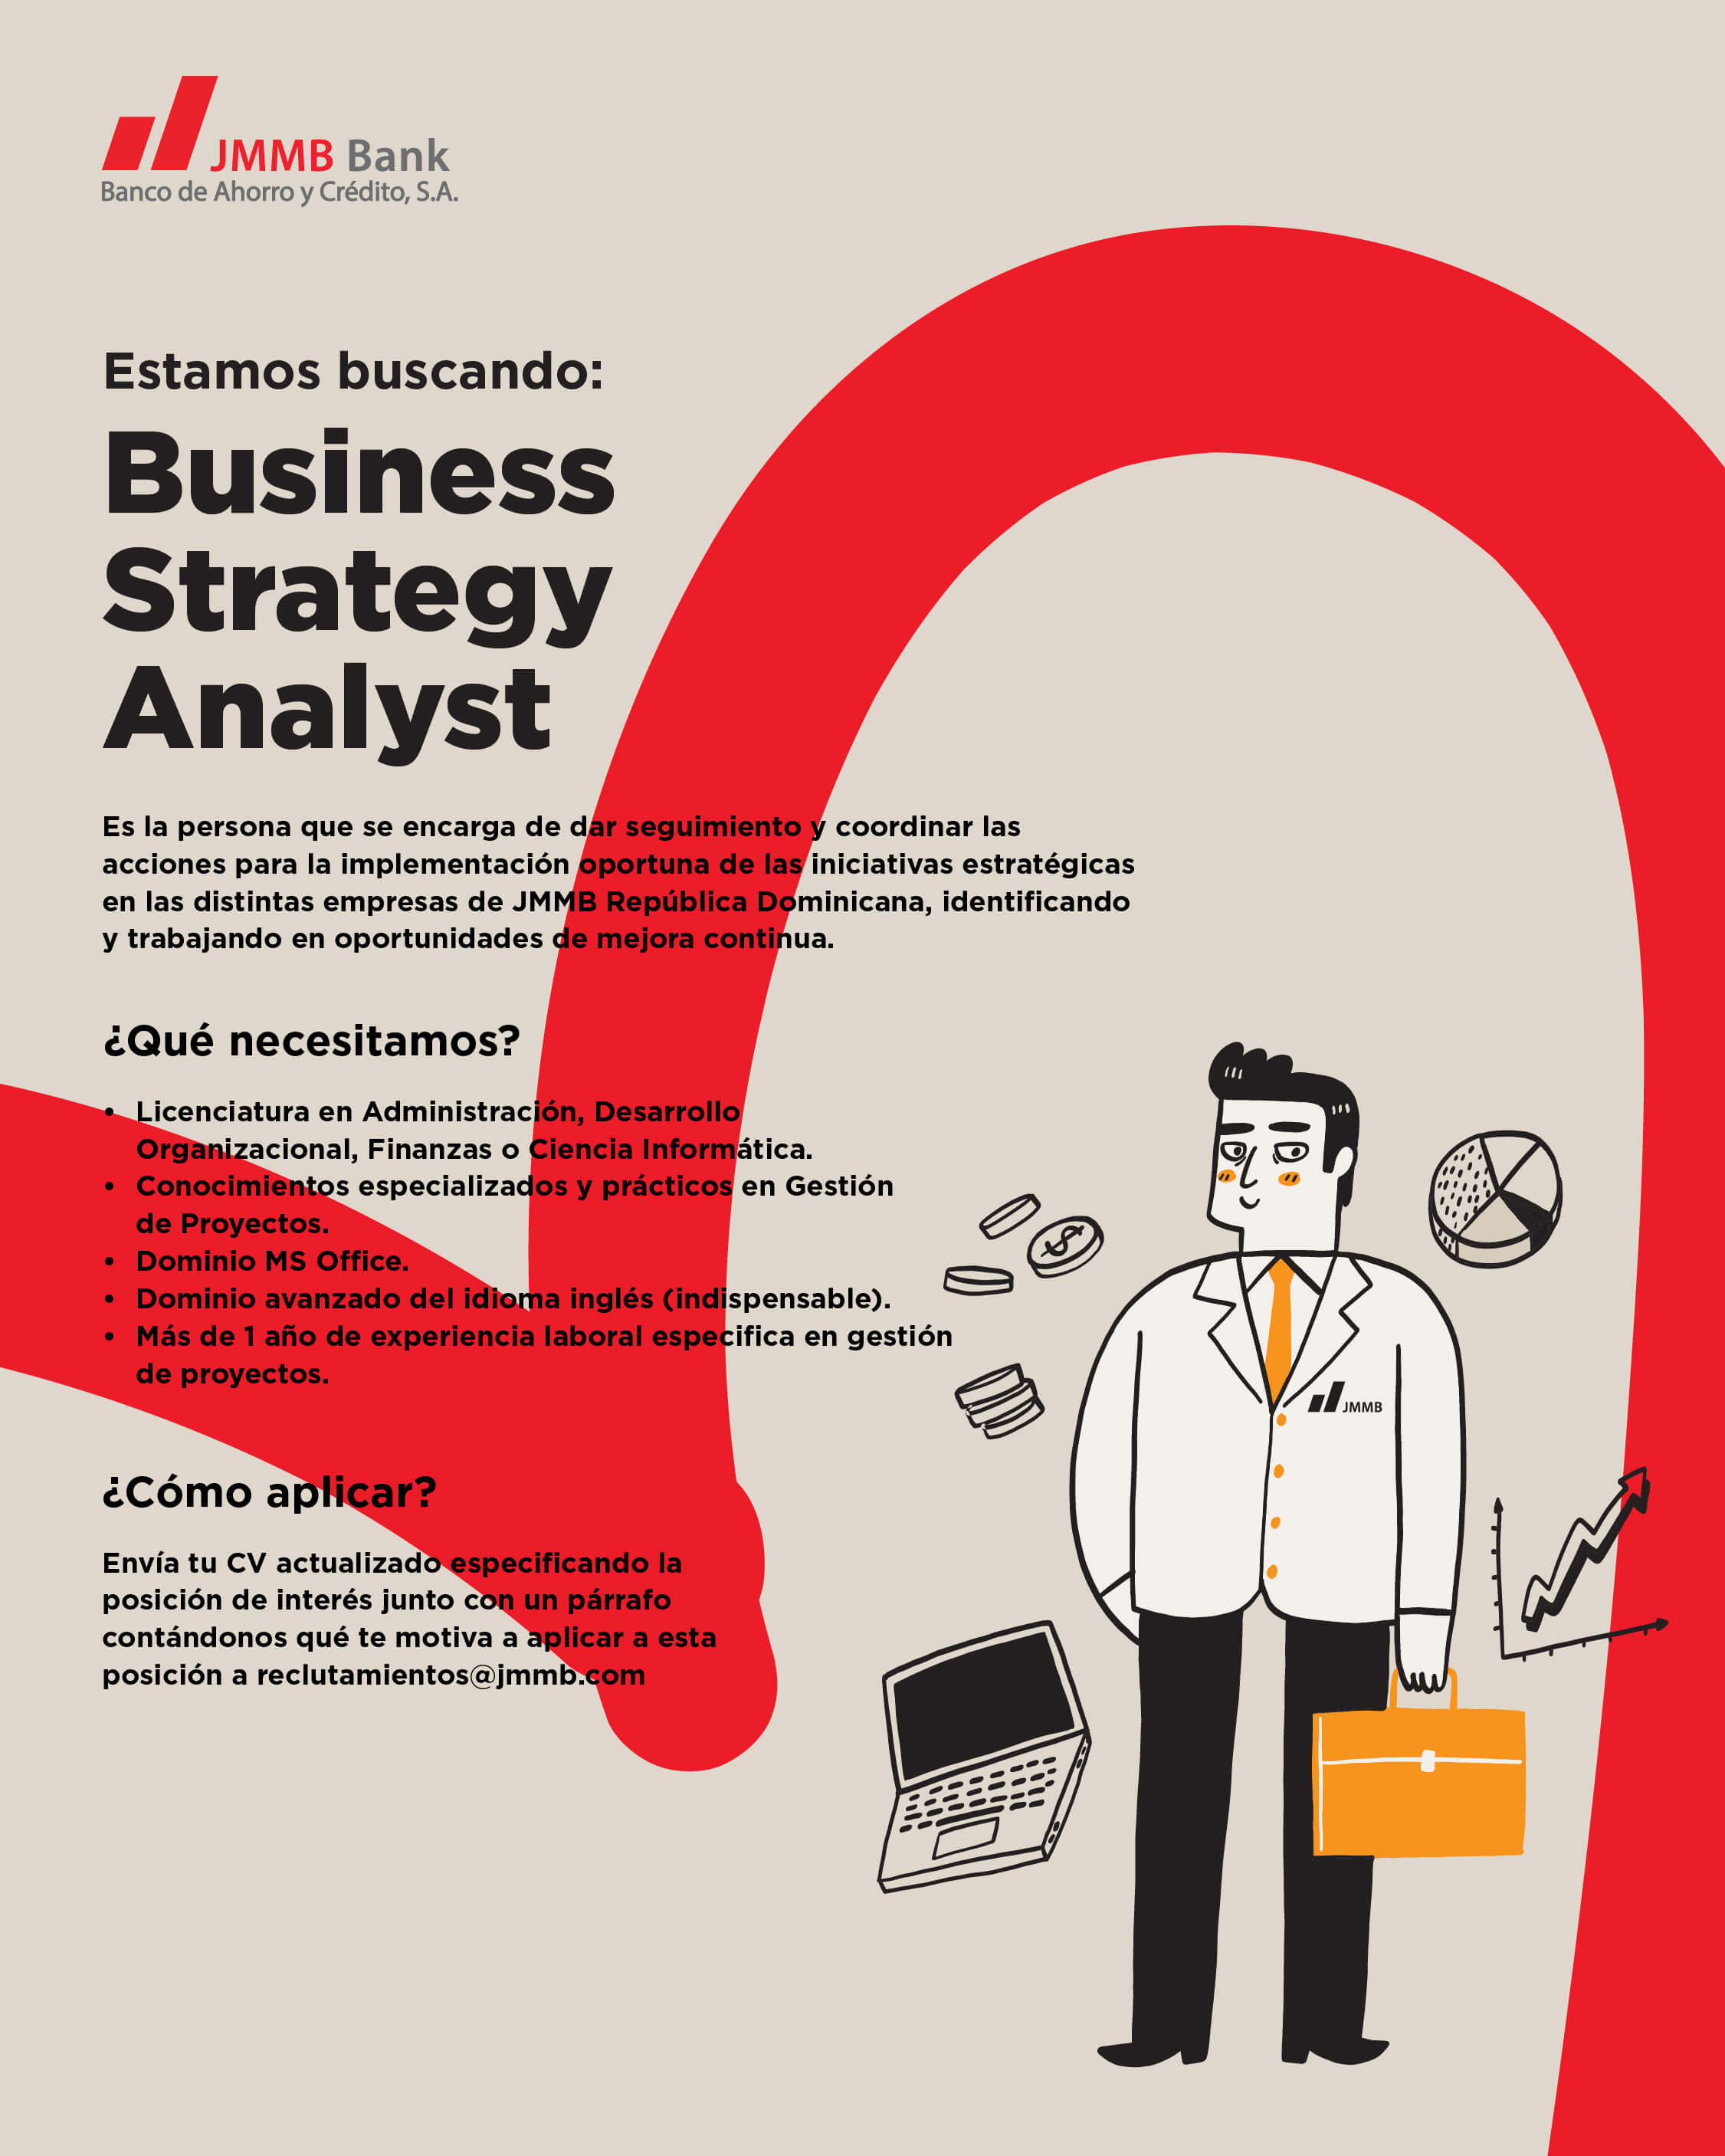 Business Strategy Analyst